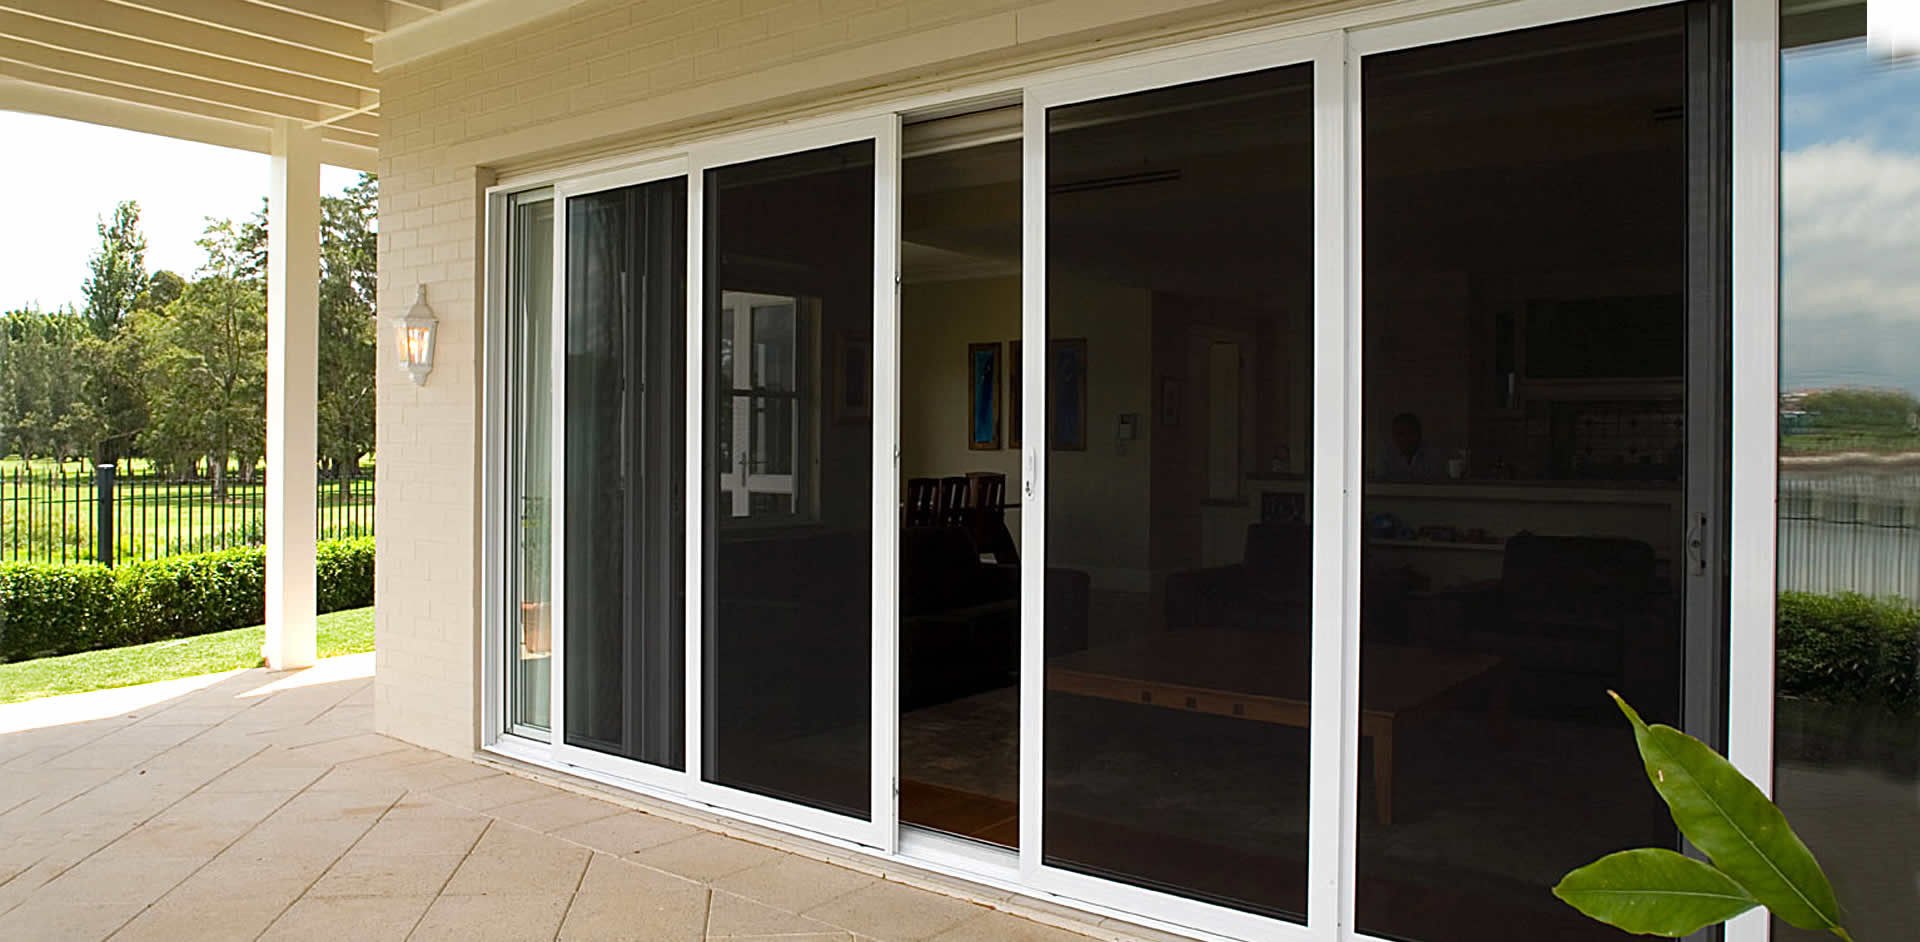 Security Screens For Doors And Windows Shade And Shutter Systems intended for sizing 1920 X 942